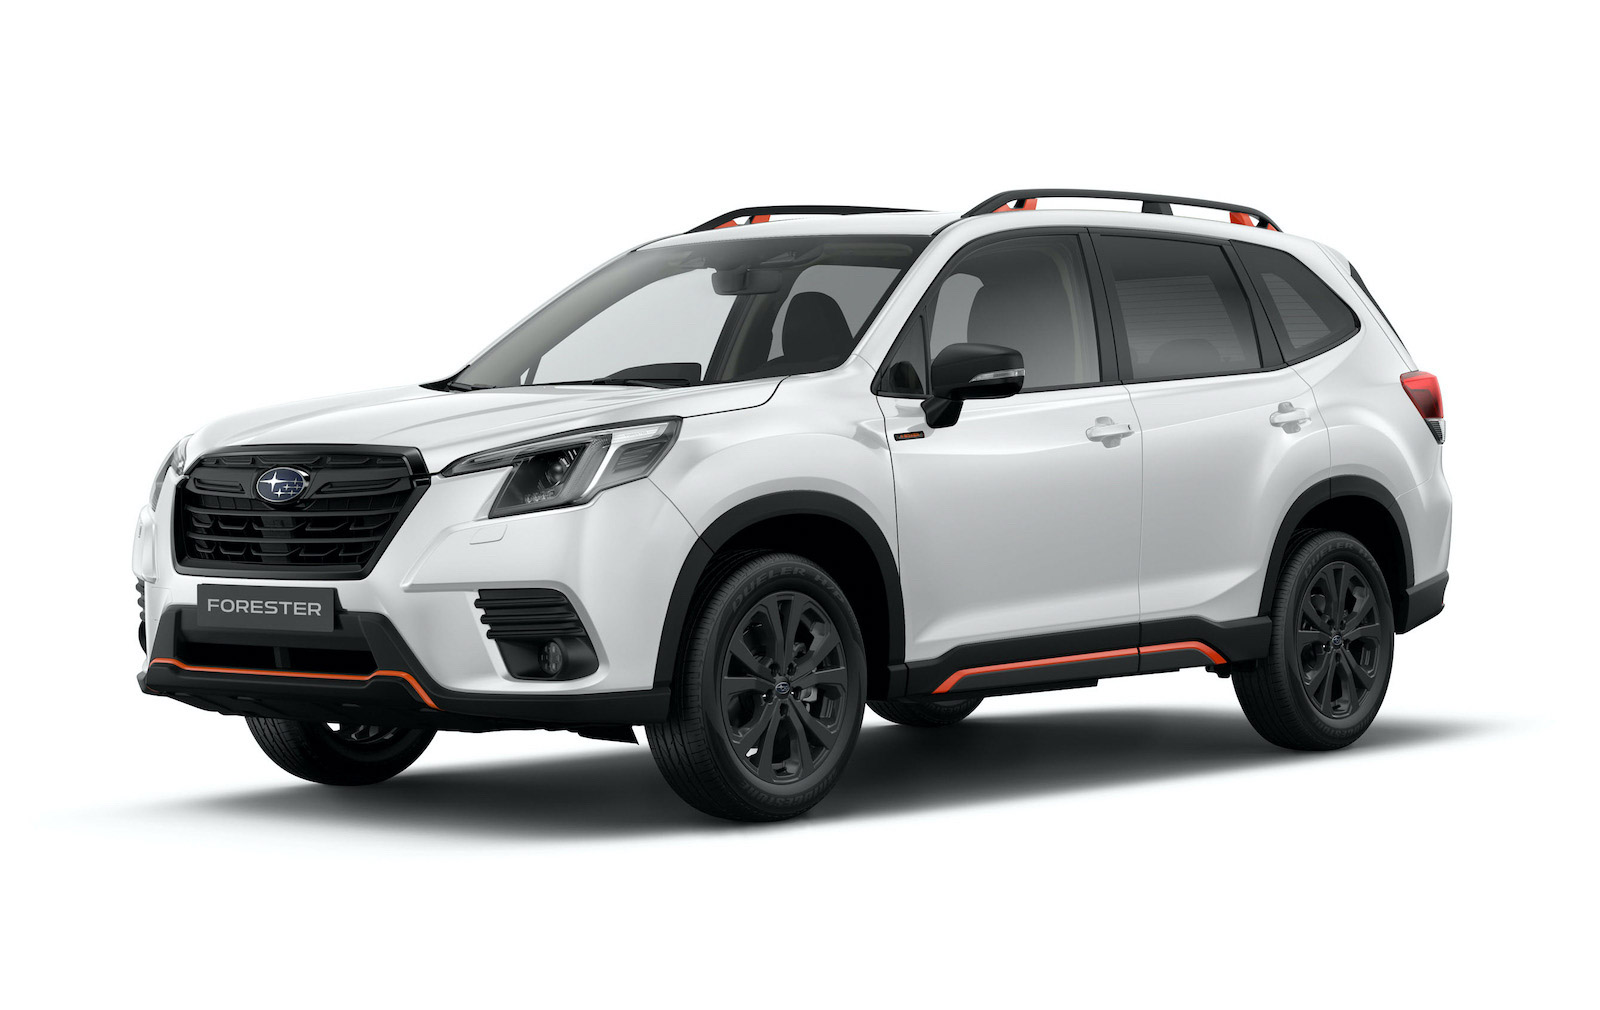 2022 Subaru Forester update on sale in Australia from 35,990